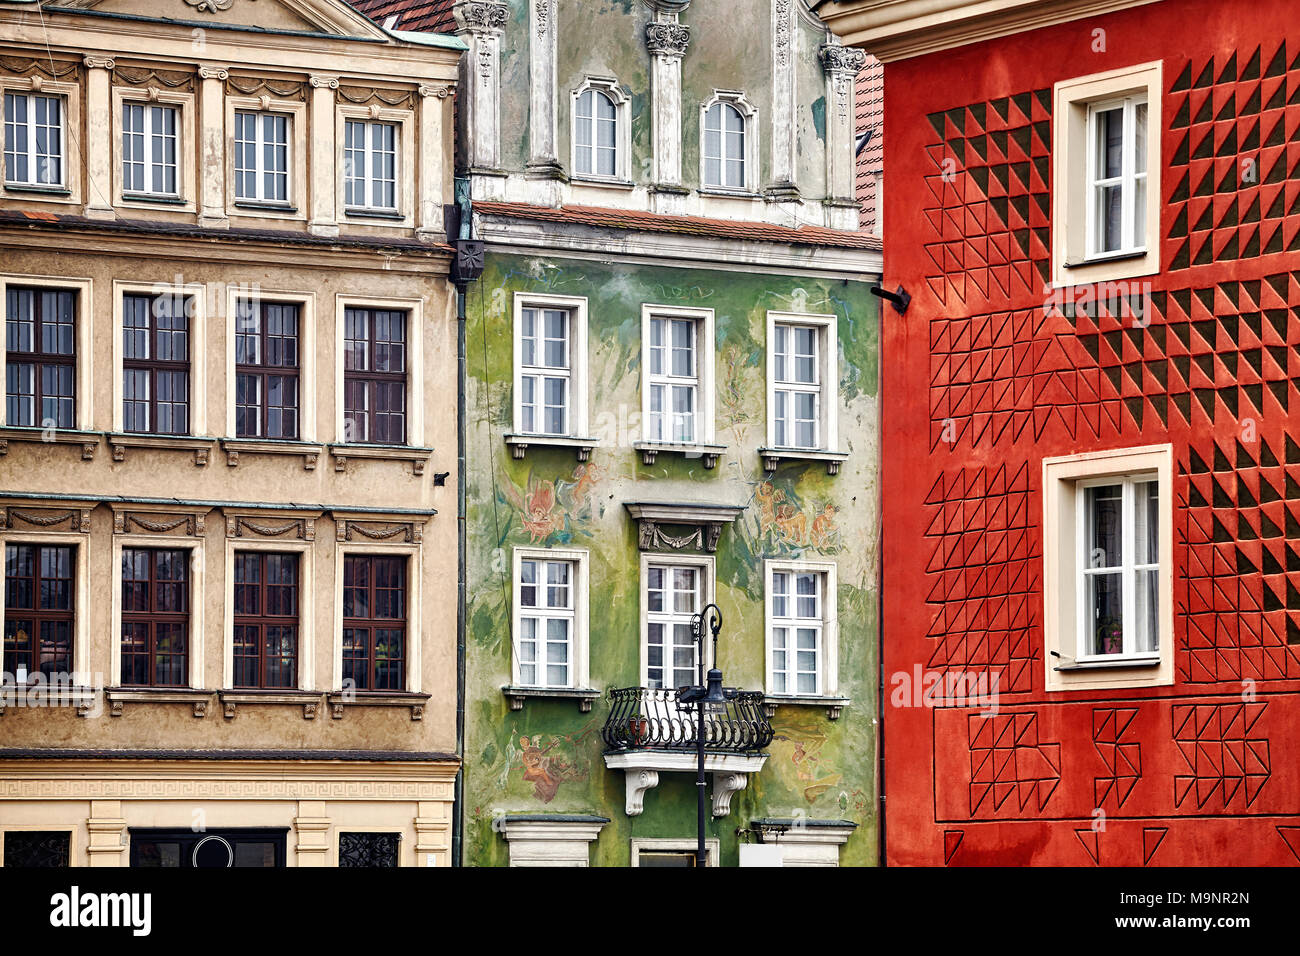 Old buildings facades in the Poznan Old Market Square, Poland. Stock Photo